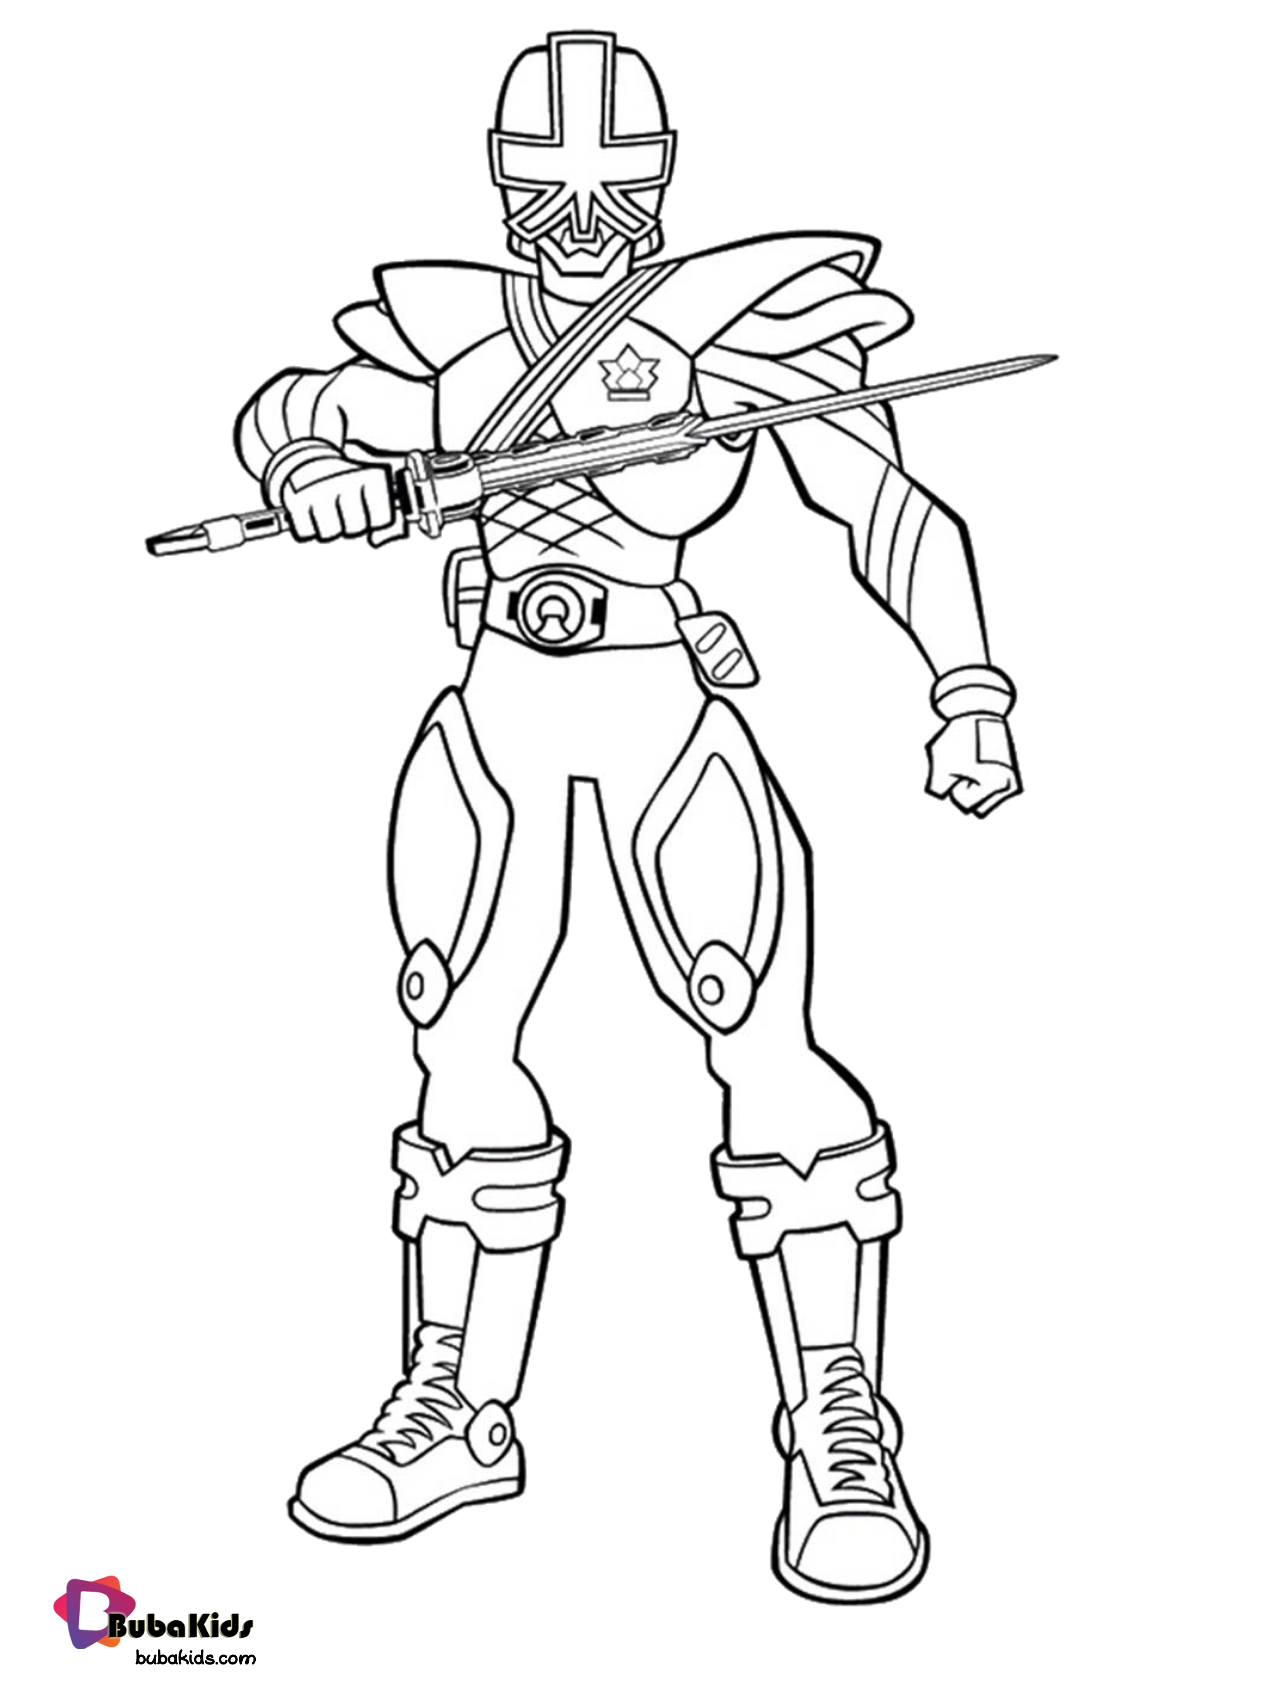 Power Rangers Megaforce coloring pages to print. Wallpaper